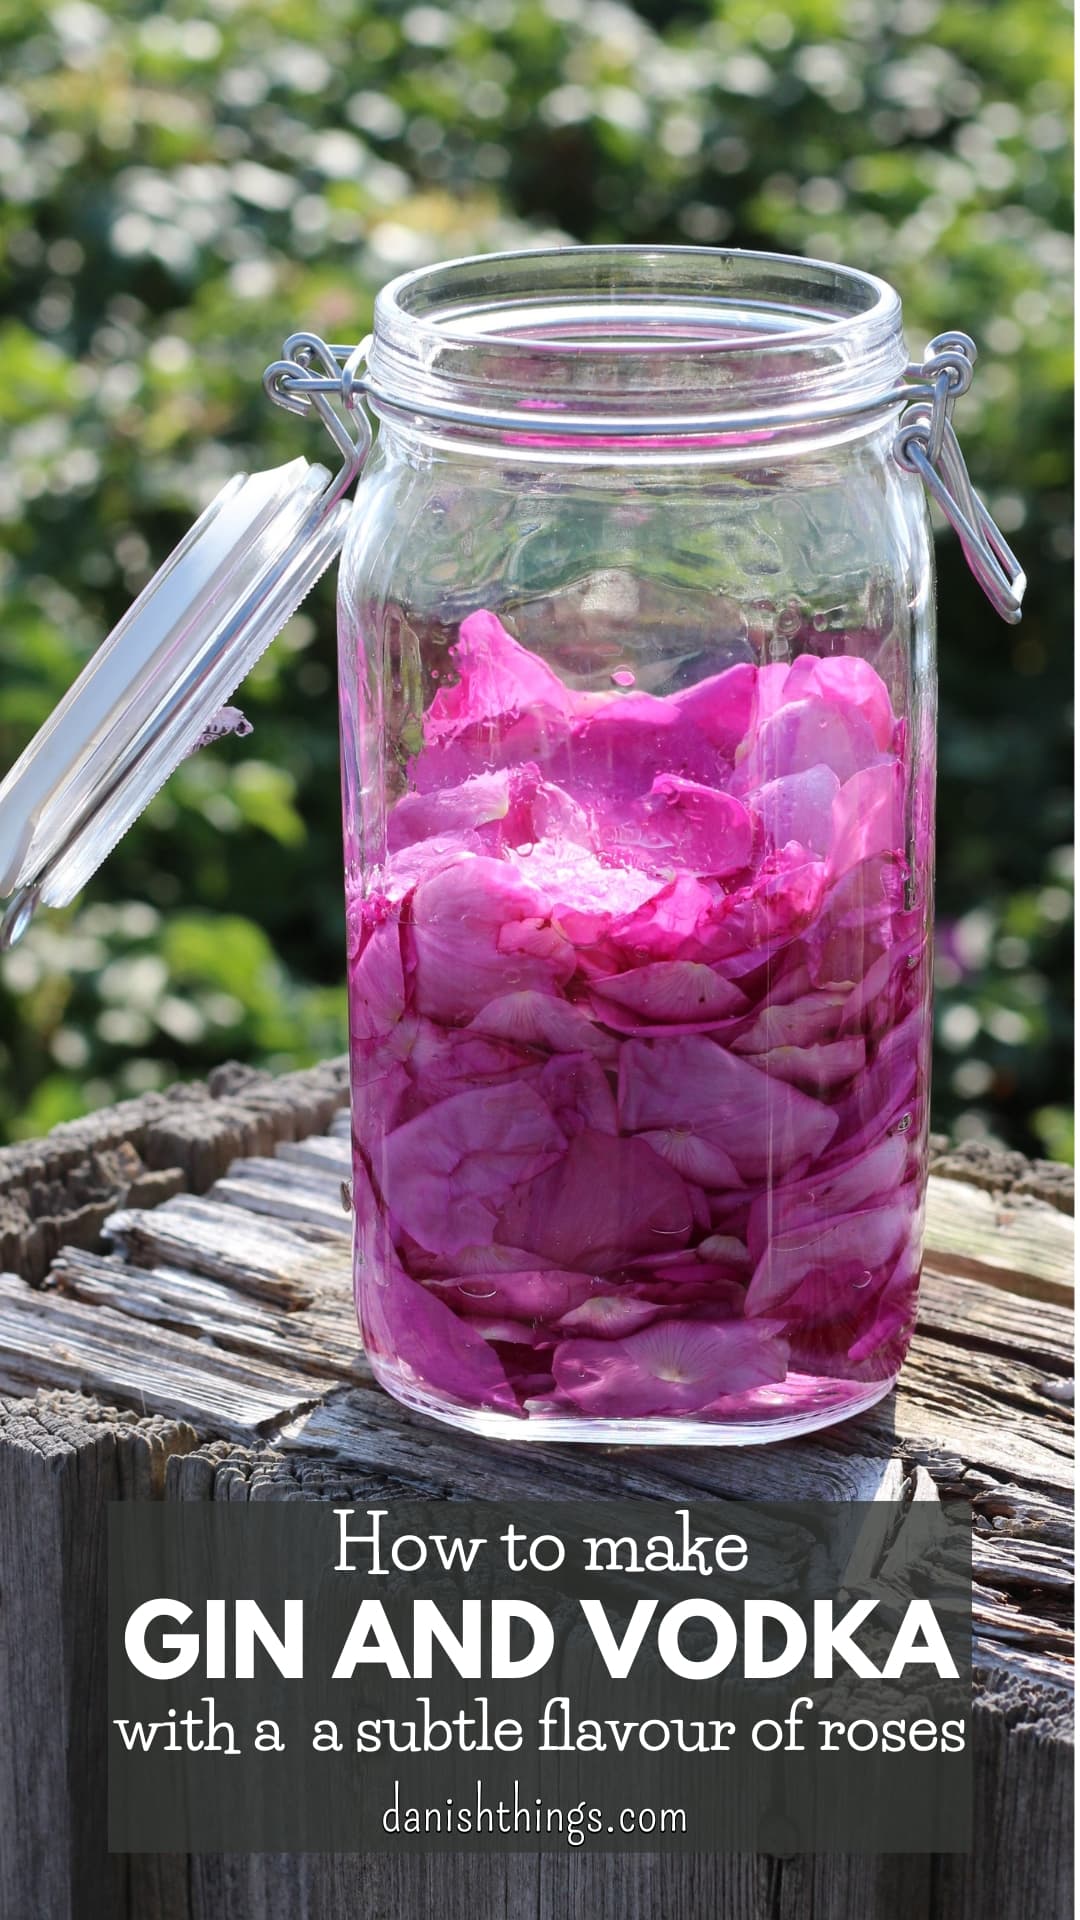 How to make your own rose-infused alcohol in days  - make gin or vodka with a subtle flavour of roses. Add a personal touch to your cocktails and long drinks using homemade rose gin and rose vodka. Find recipes, prints, and inspiration for all seasons at danishthings.com © Christel Parby Danish Things #DanishThings #rosehip #rosevodka #rosegin #rose #roses #gin #rosehippetals #vodka #alcohol #flowers #eatnature #danish #recipe